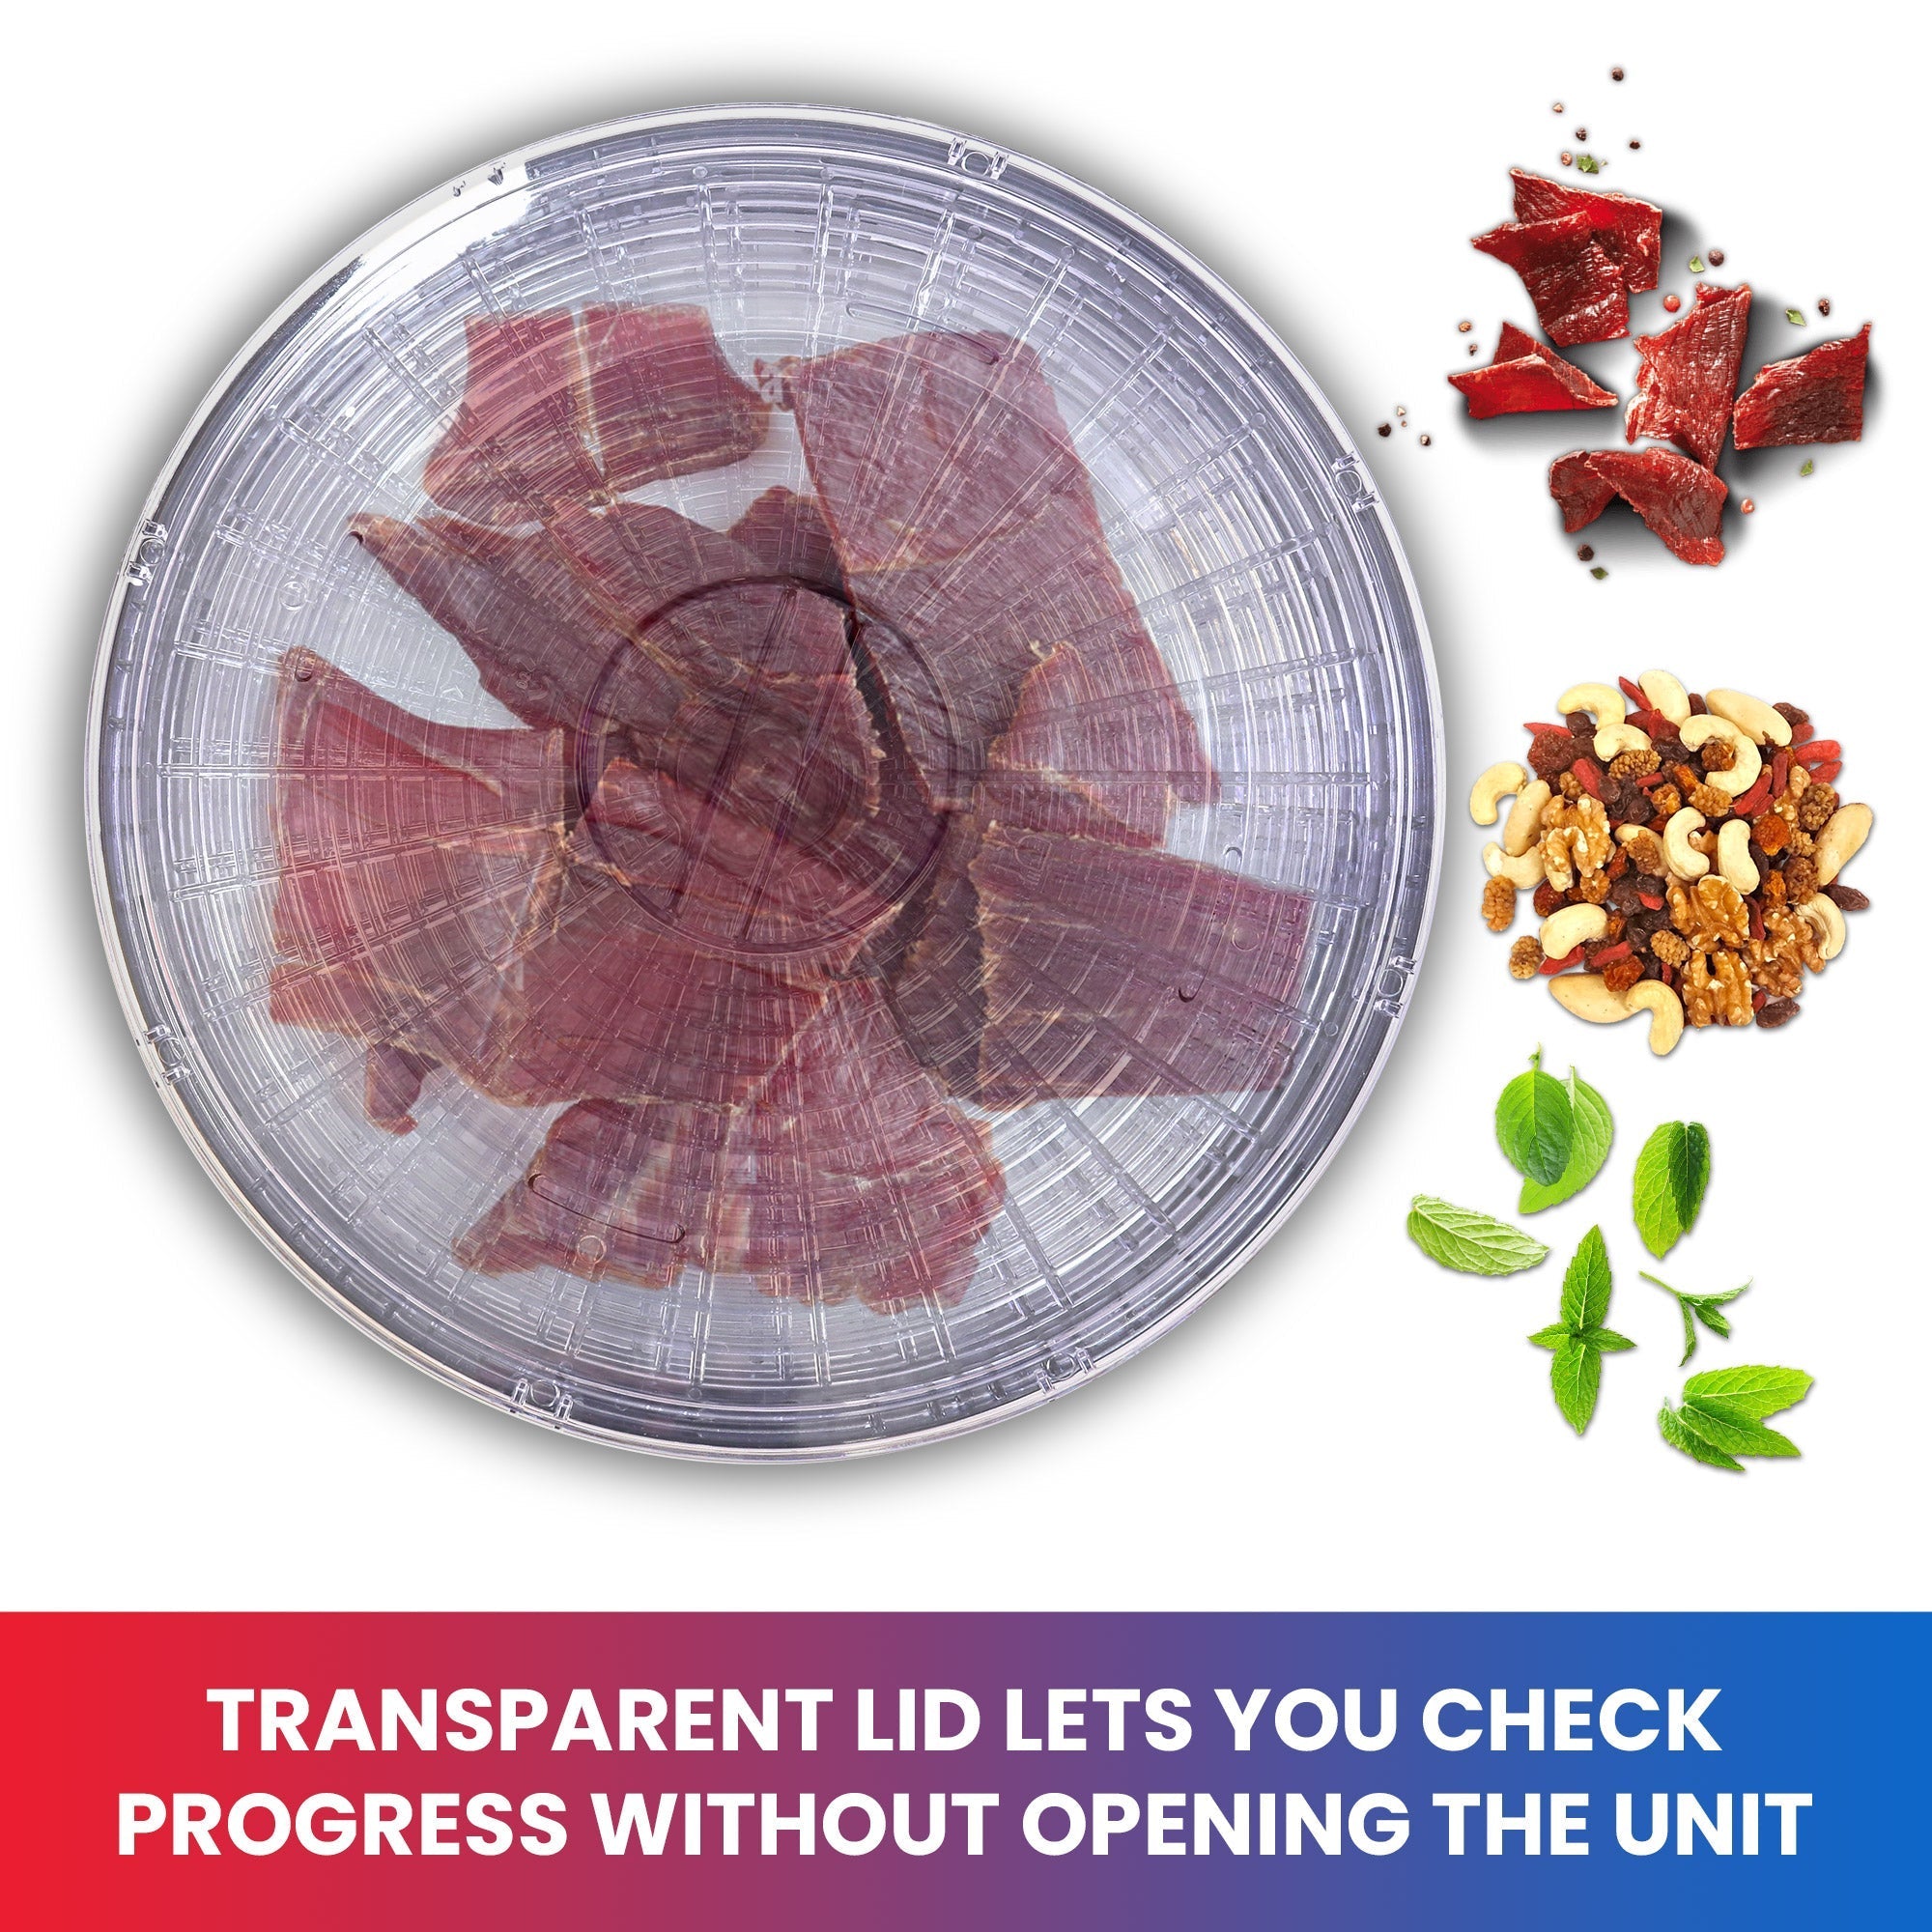 Product shot from above of food dehydrator tray with lid on and thin slices of red meat inside; three inset images to the right show beef jerky and peppercorns, mixed nuts, and mint leaves. Text below reads "Transparent lid lets you check progress without opening the unit"